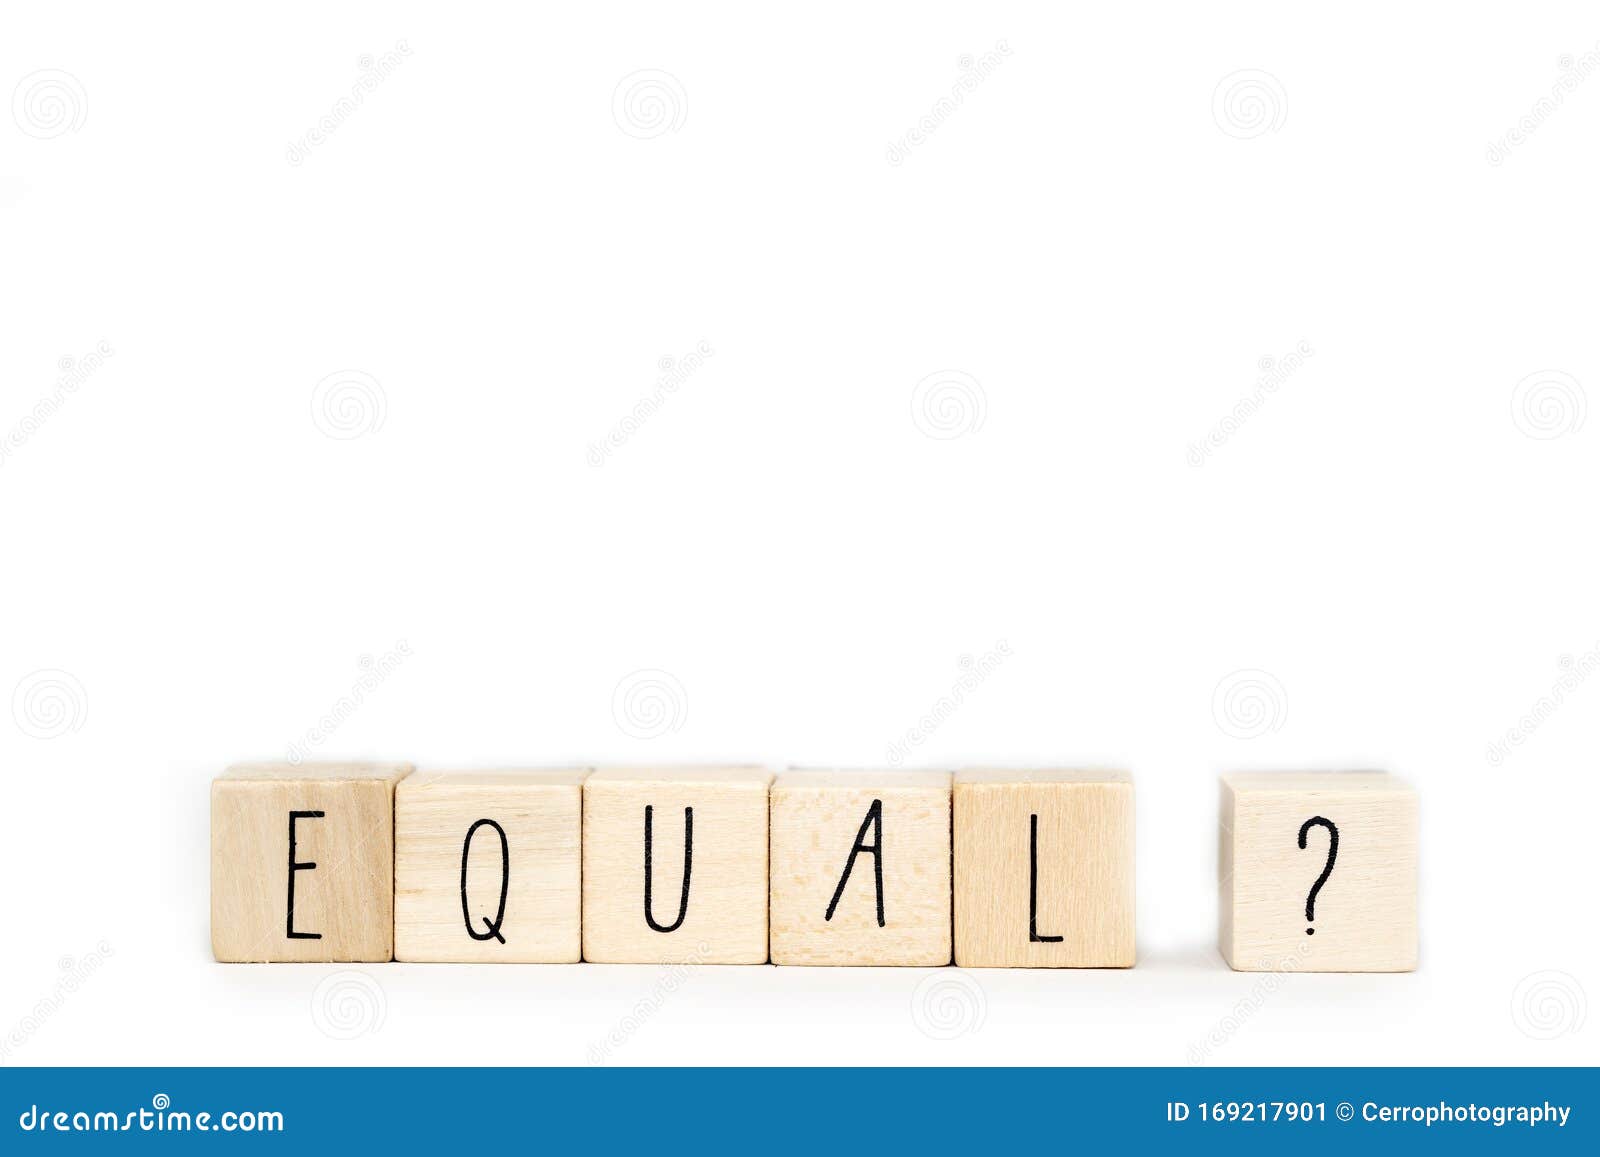 wooden cube with a question mark and the word equal  on white background,  for gender equality and social